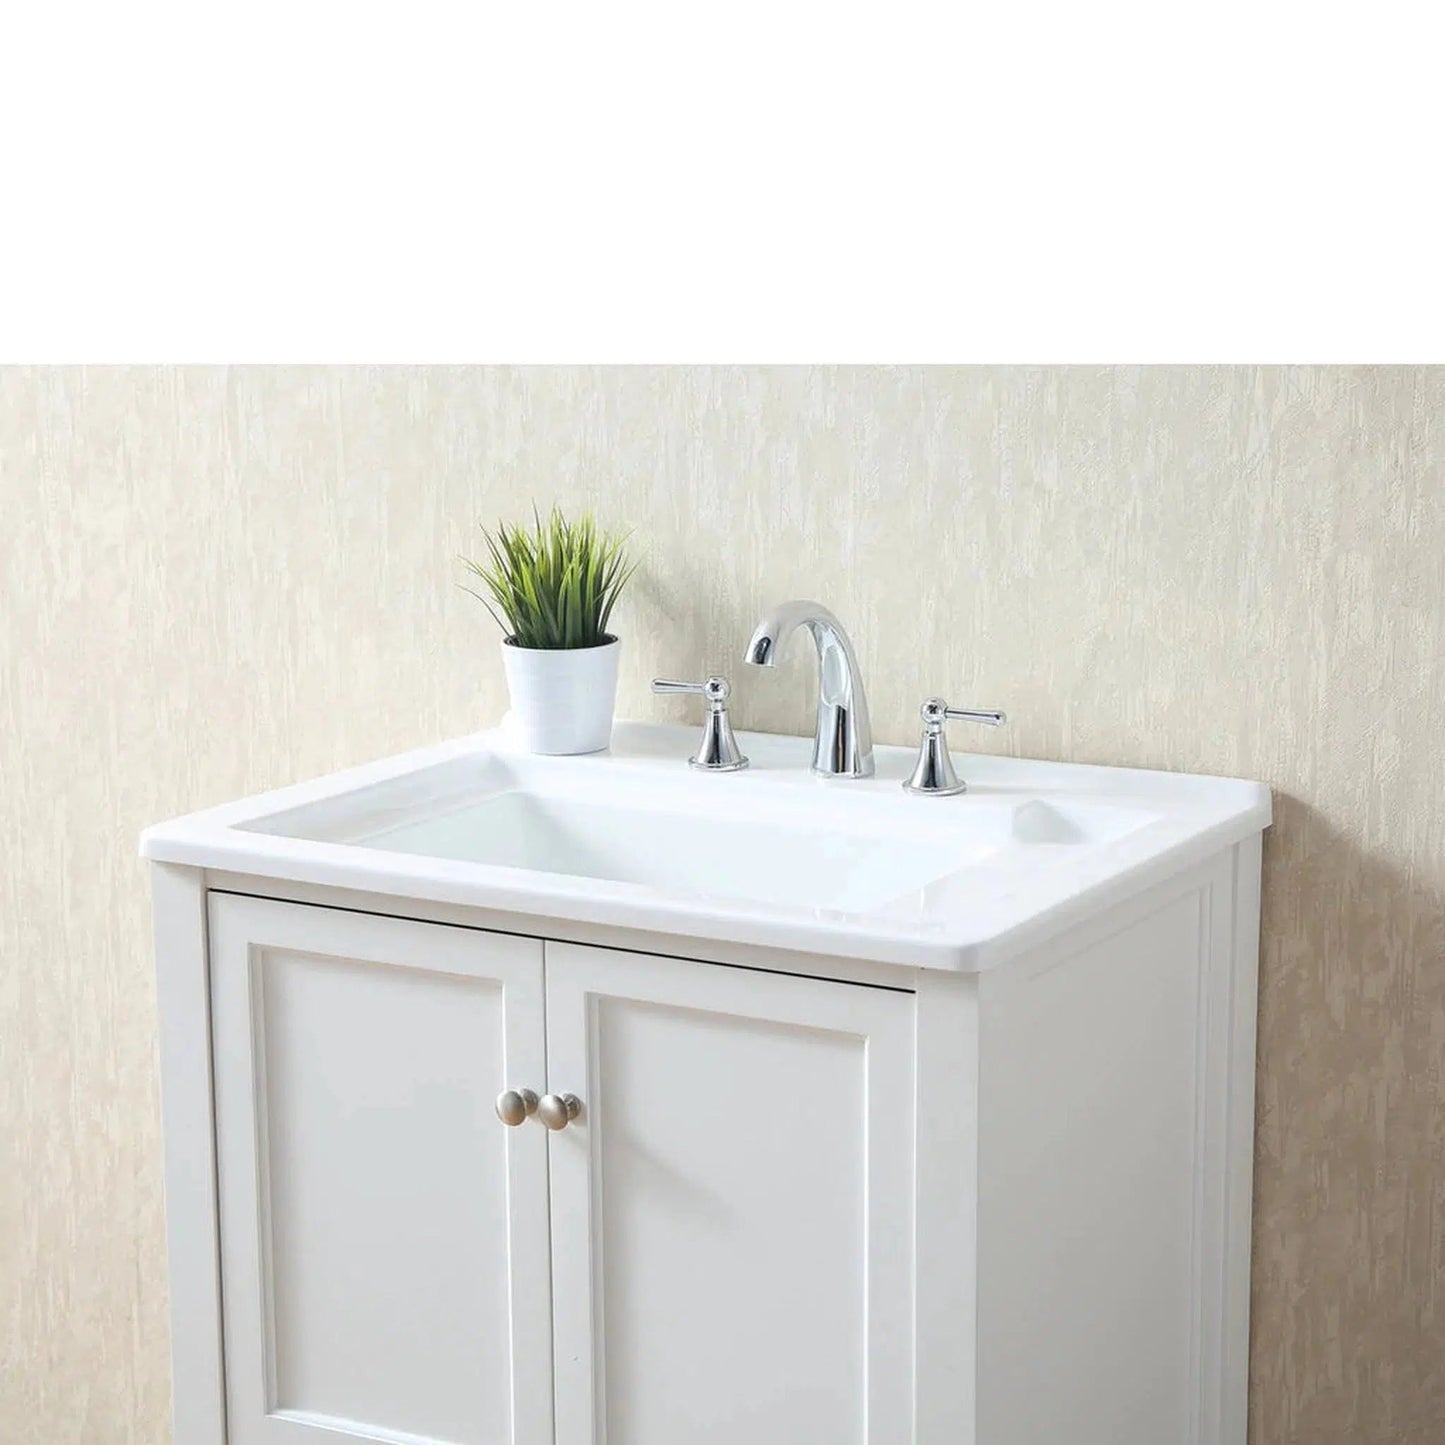 Stufurhome Delia 30" White Freestanding Laundry Utility Acrylic Sink With 1 Drawer, 2 Doors and Widespread Faucet Holes